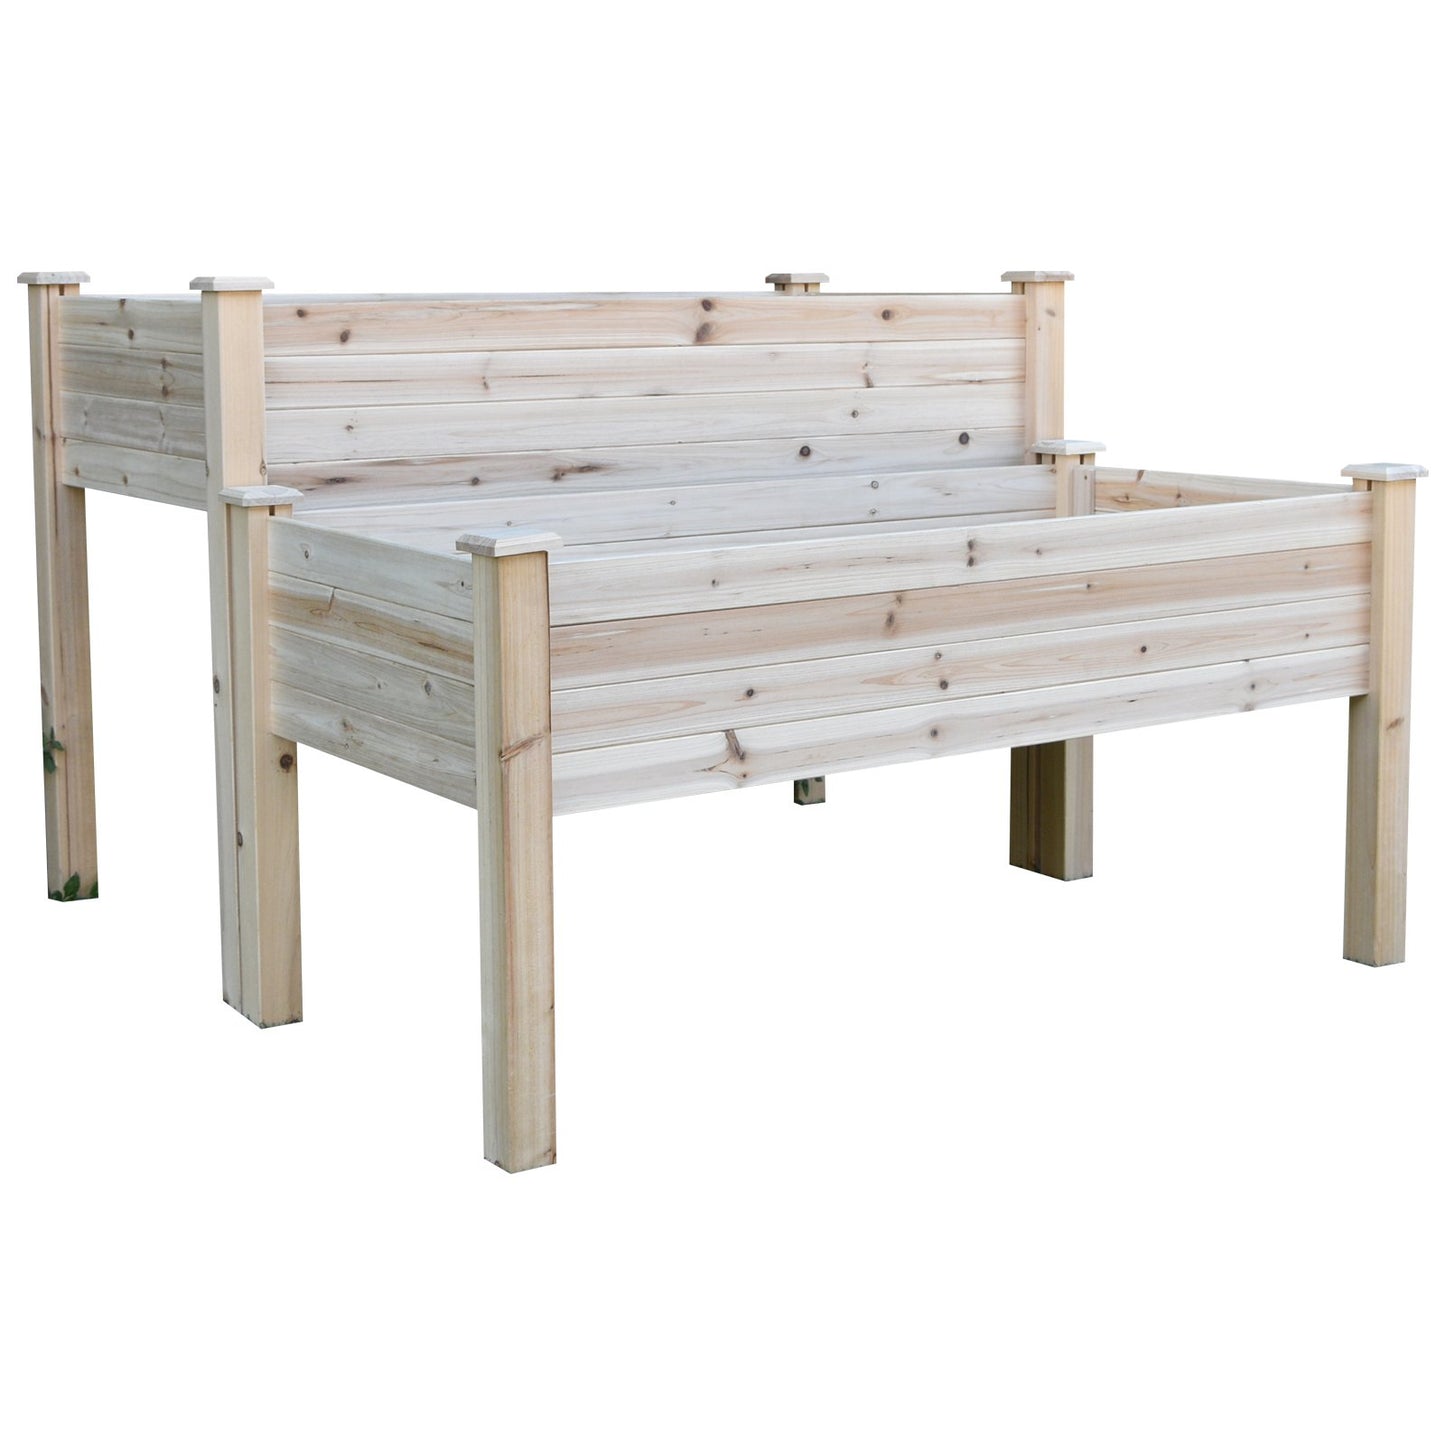 Outsunny Fir Wood 2-Piece Raised Planter Flower Bed